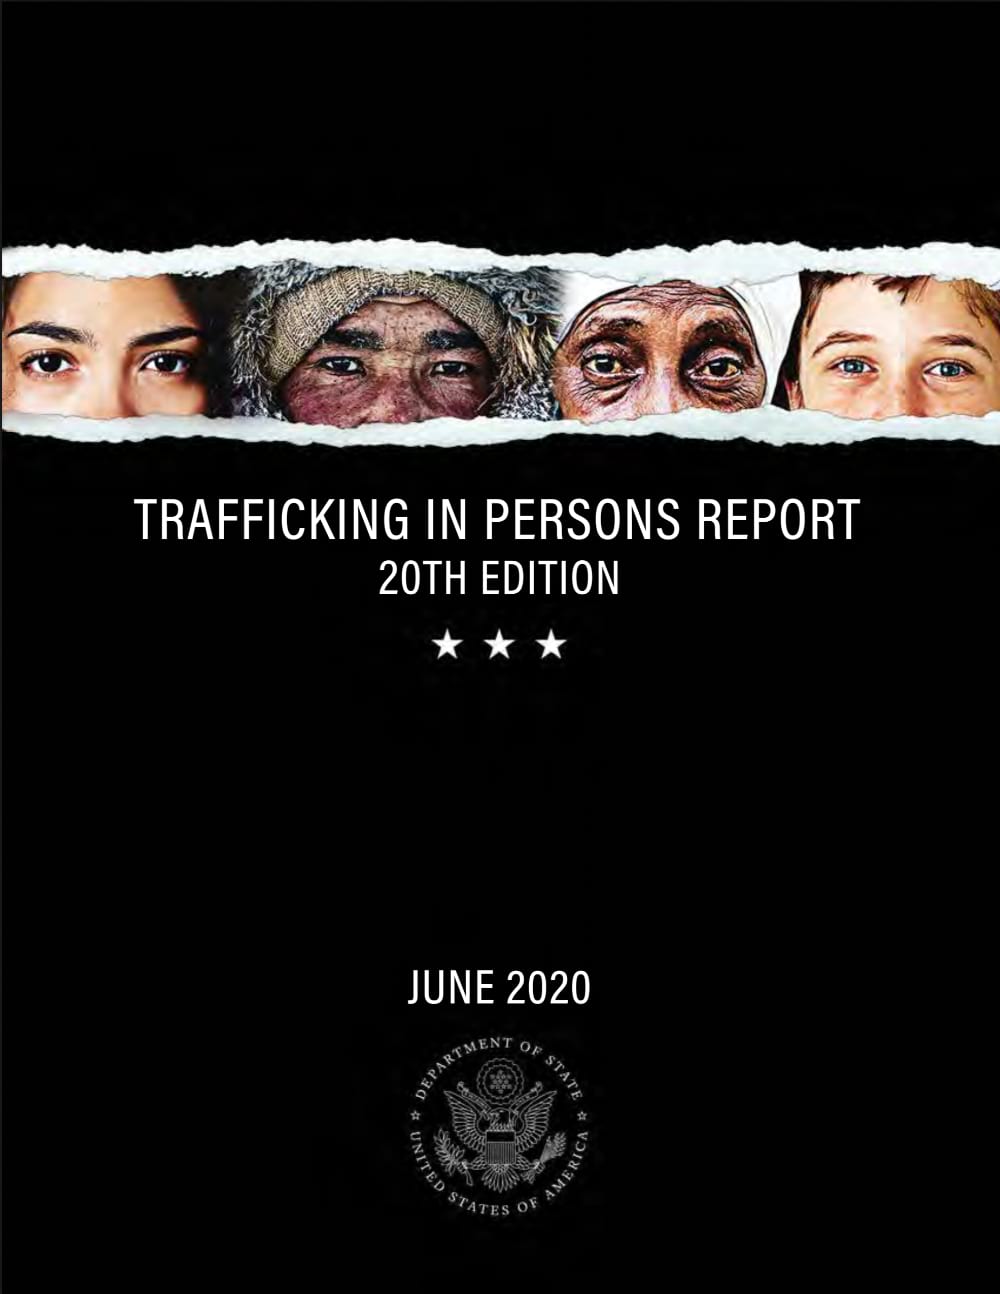 Trafficking in Persons Report, 2020